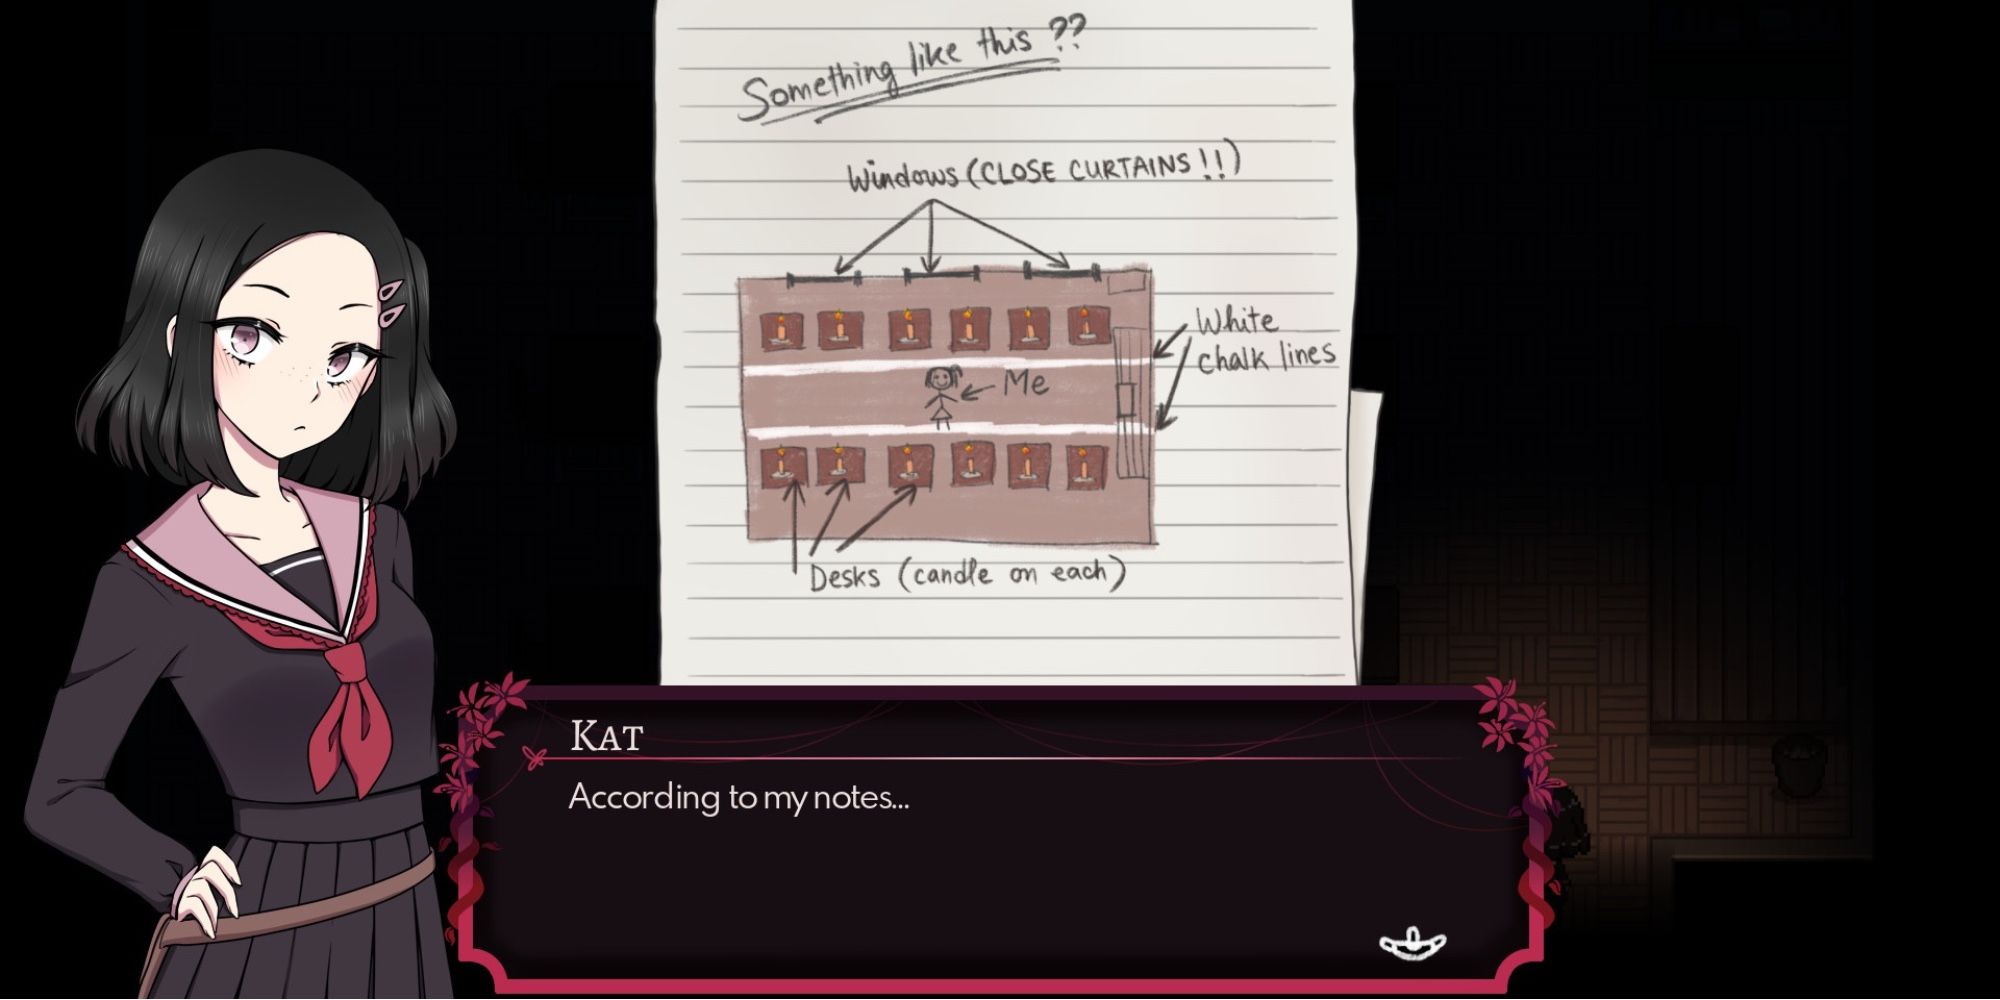 Free Anime Games on Steam - Project Kat - Kat checks her notes